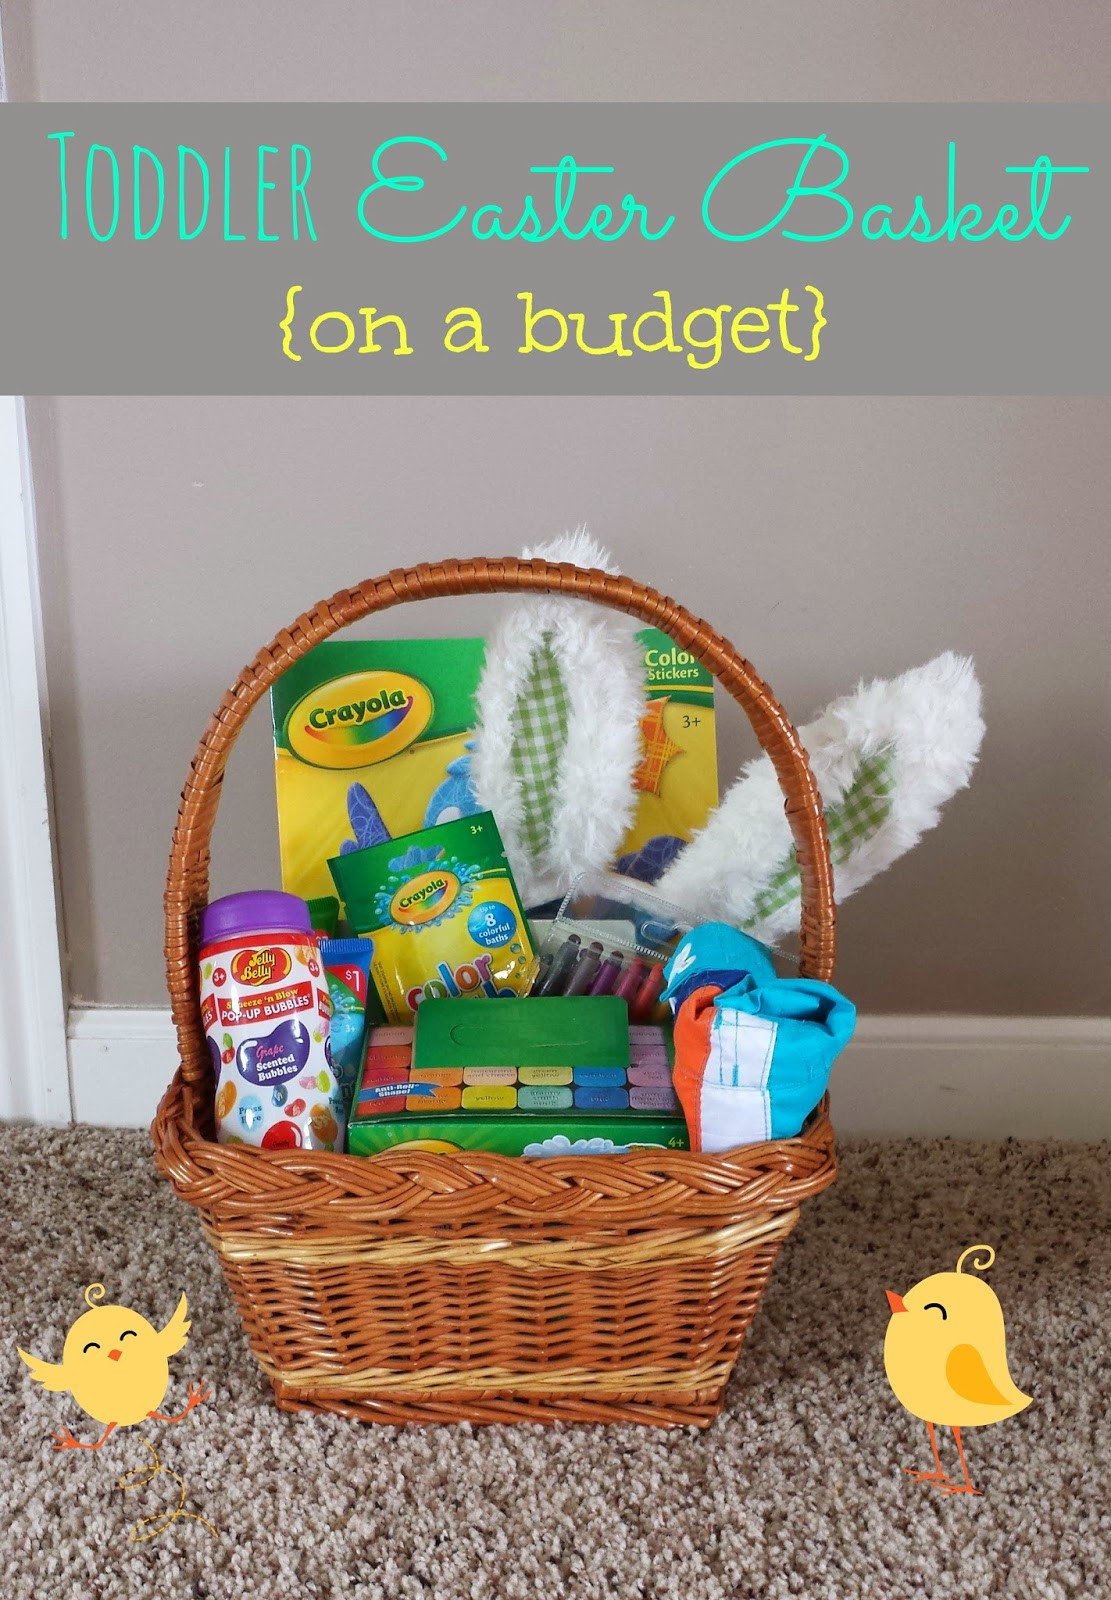 Easter Basket Ideas For 12 Year Old Boy
 Simple Suburbia Toddler Easter Basket Ideas